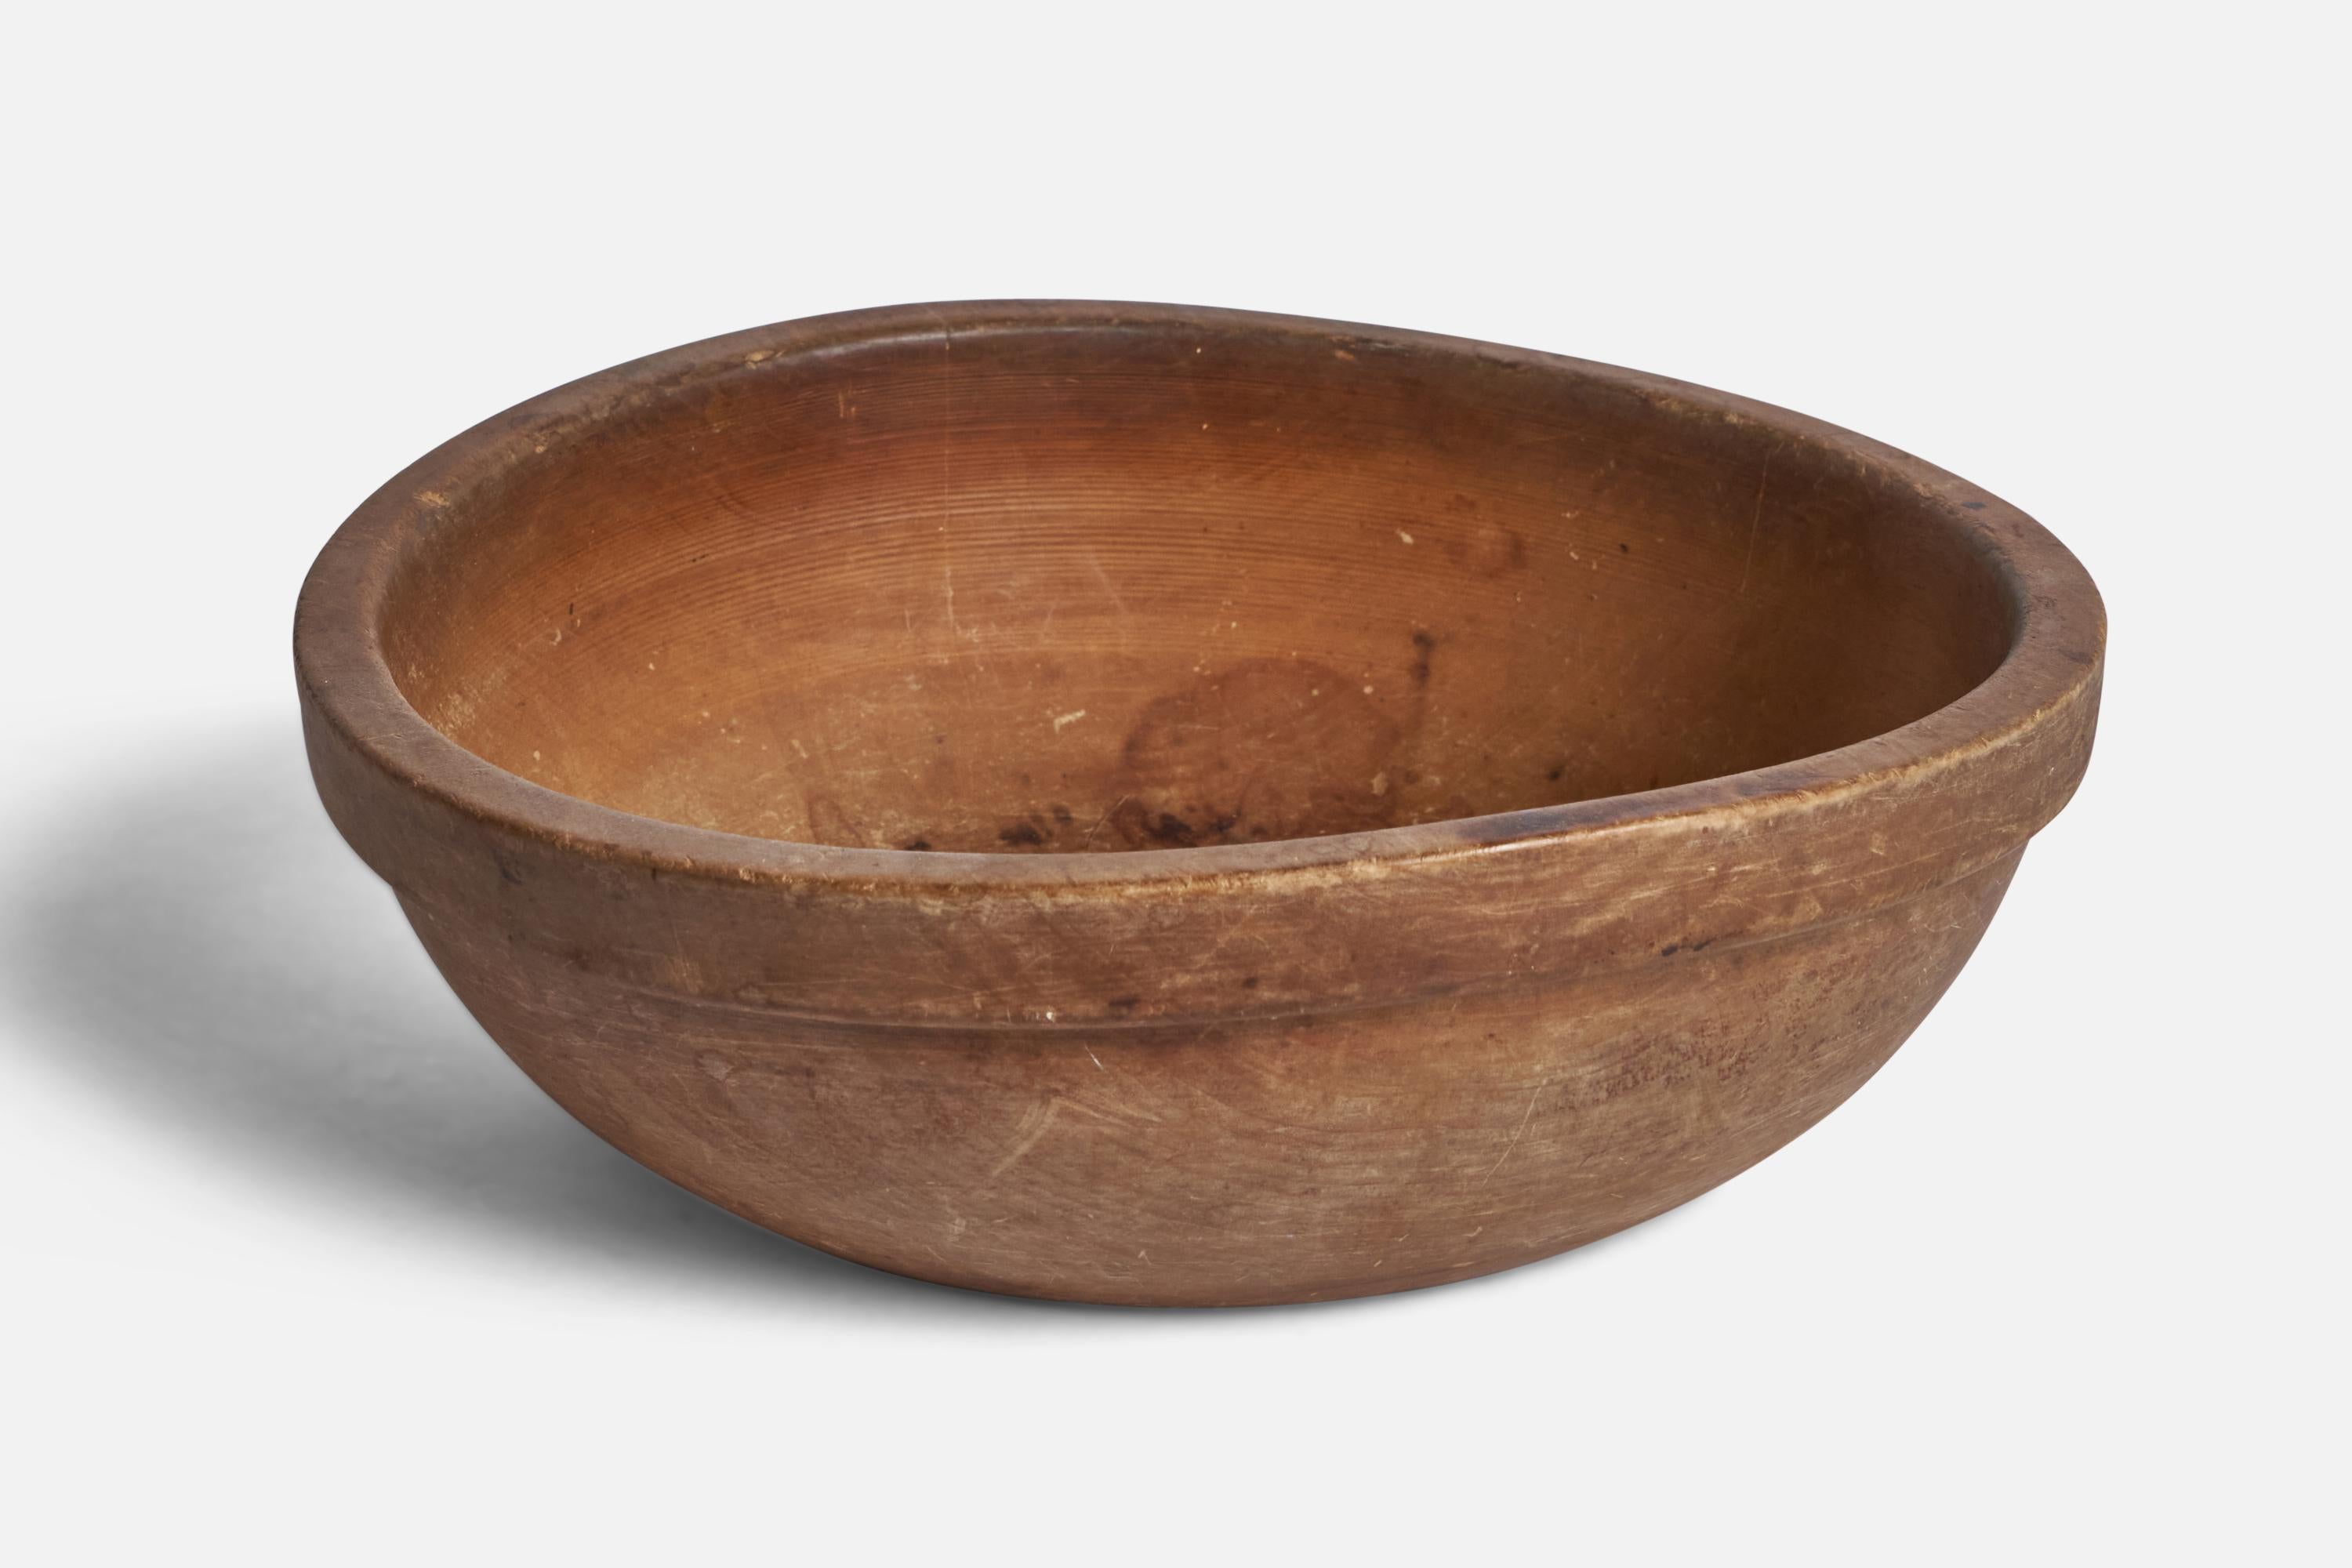 A wood bowl designed and produced in Sweden, 19th century.